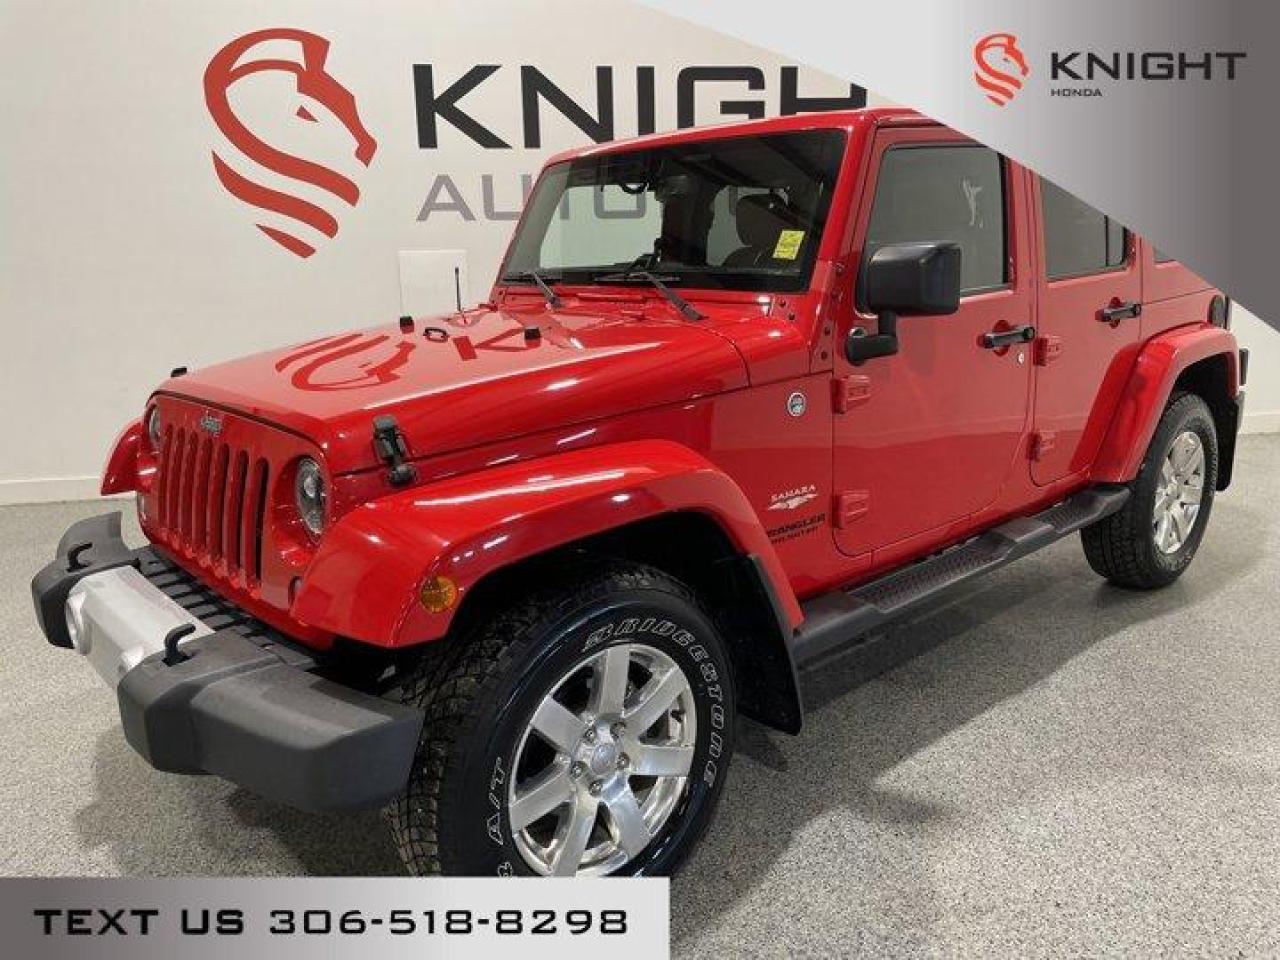 Used 2015 Jeep Wrangler Unlimited Sahara l Heated Leather Seats l 4x4 for  Sale in Moose Jaw, Saskatchewan 